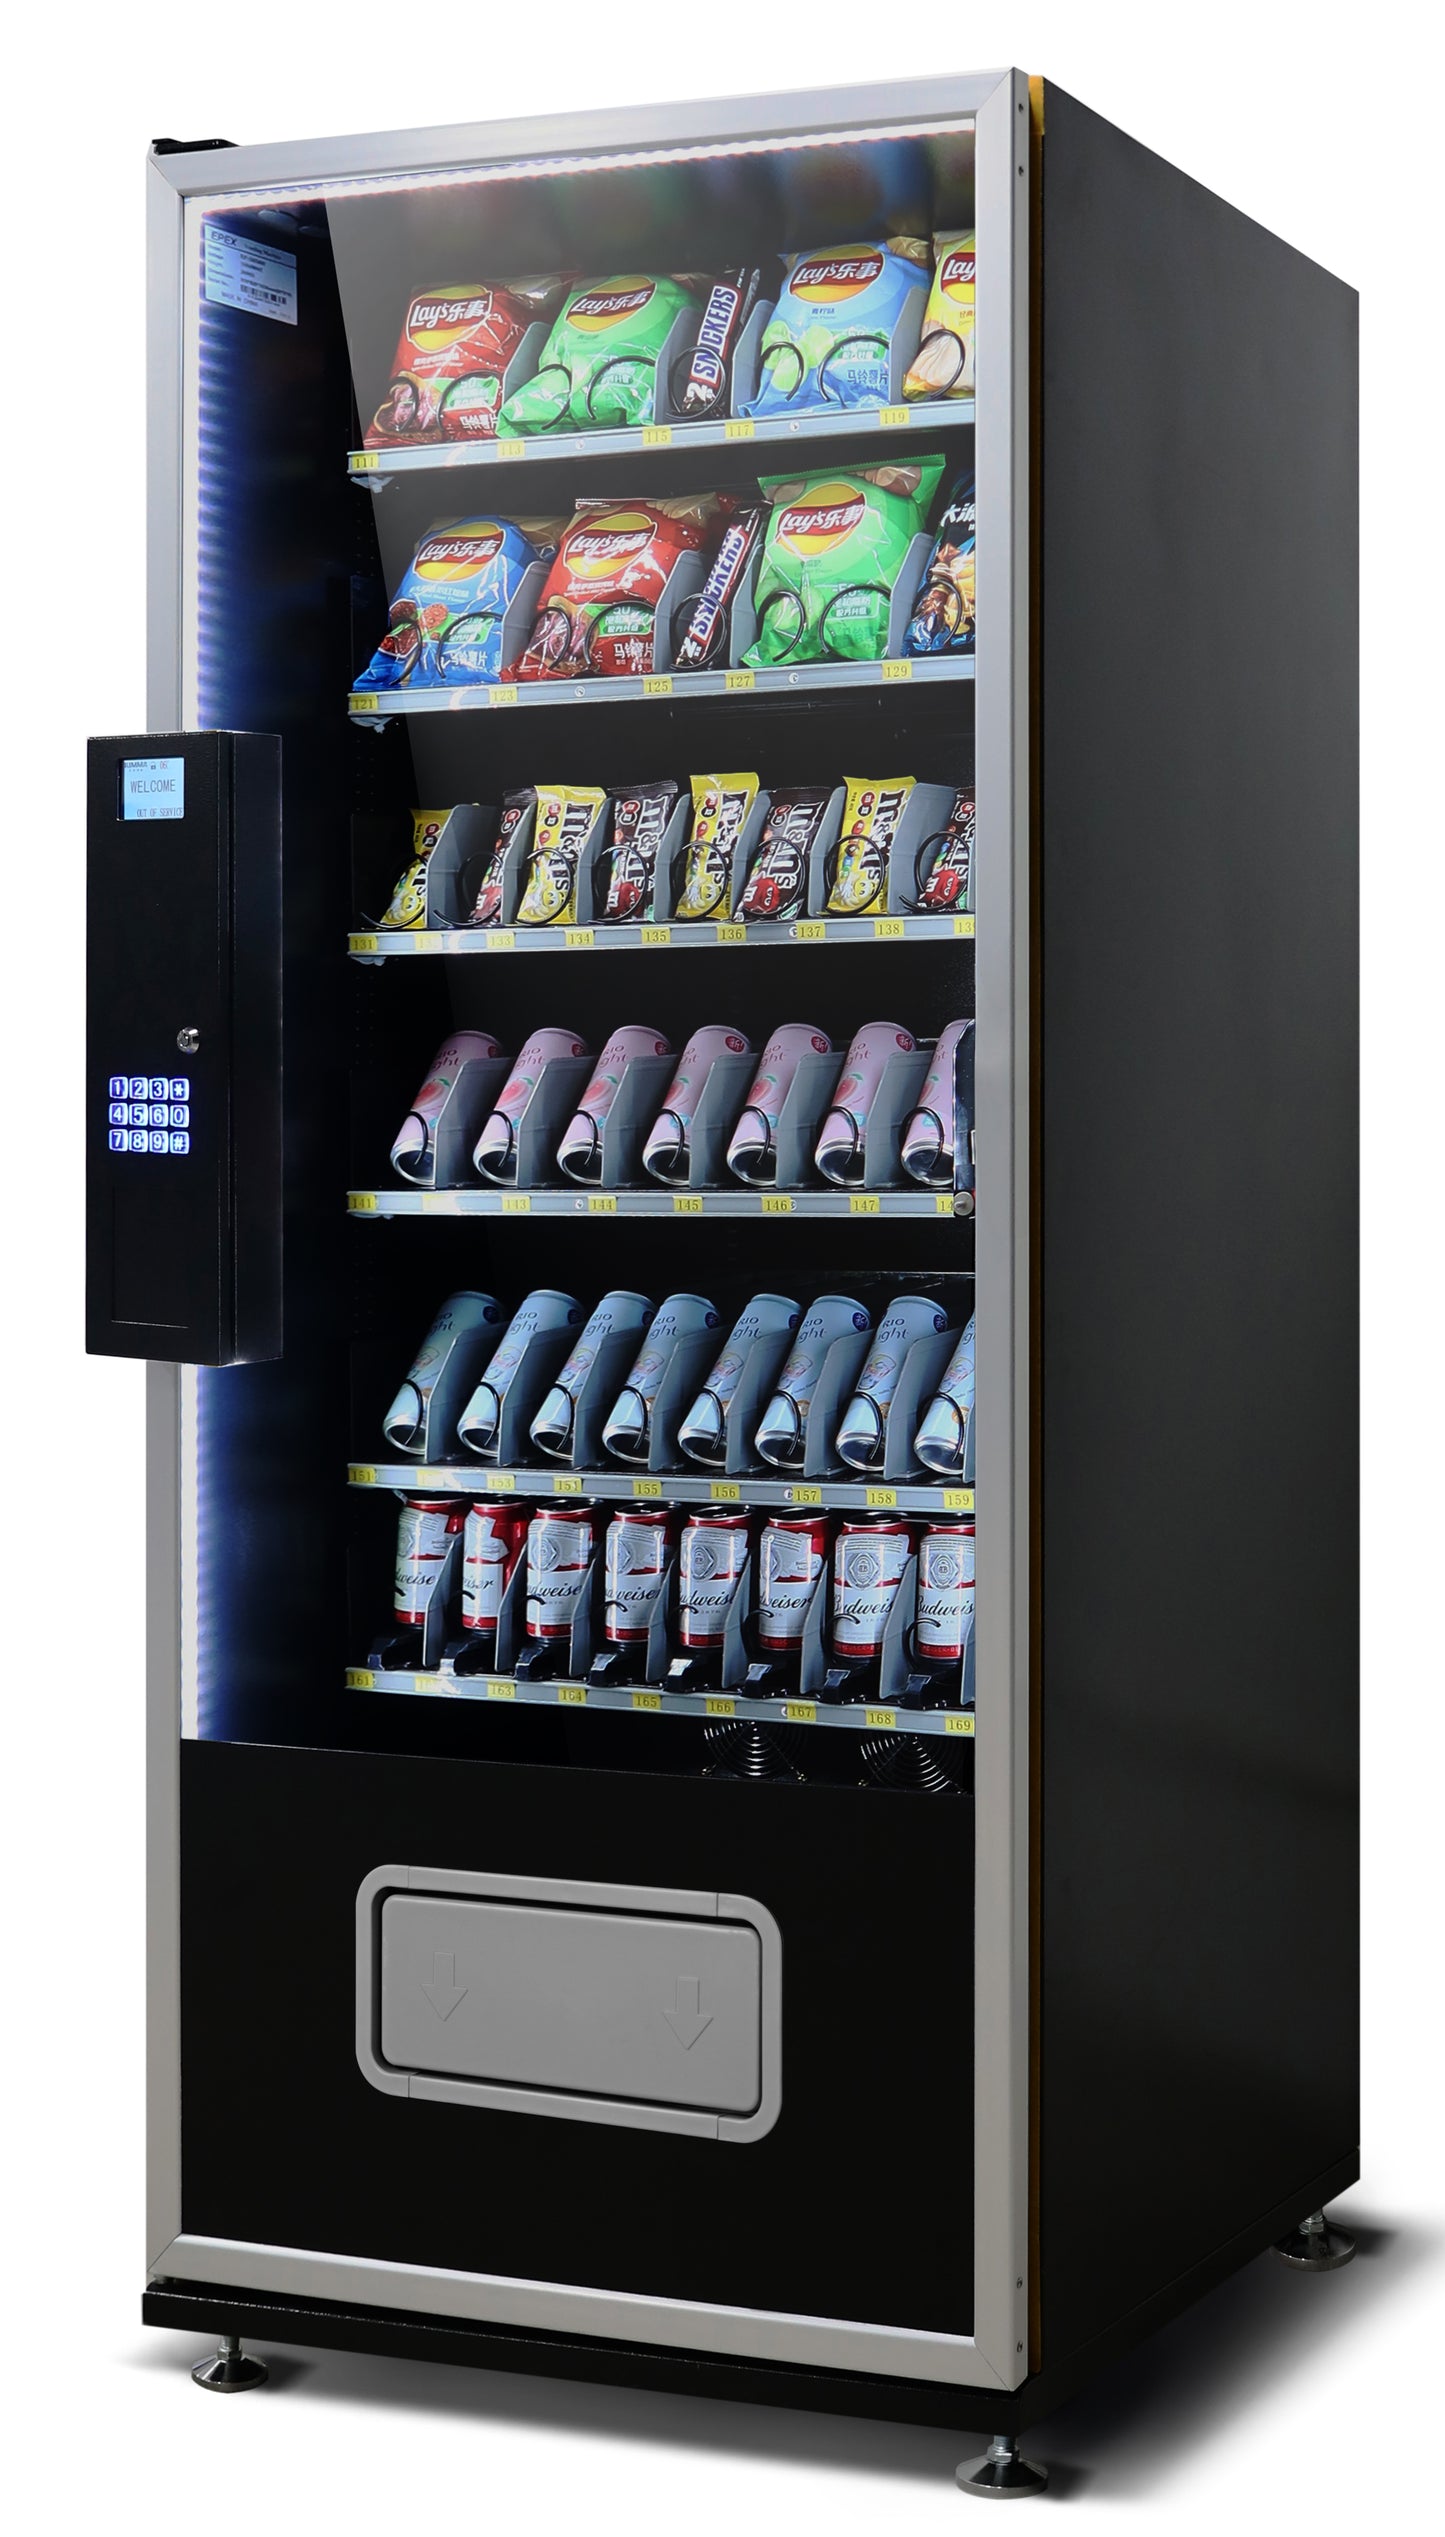 EPEX G654W Cashless Large Refrigerated Combo Vending Machine with Nayax VPOS Touch Card Reader